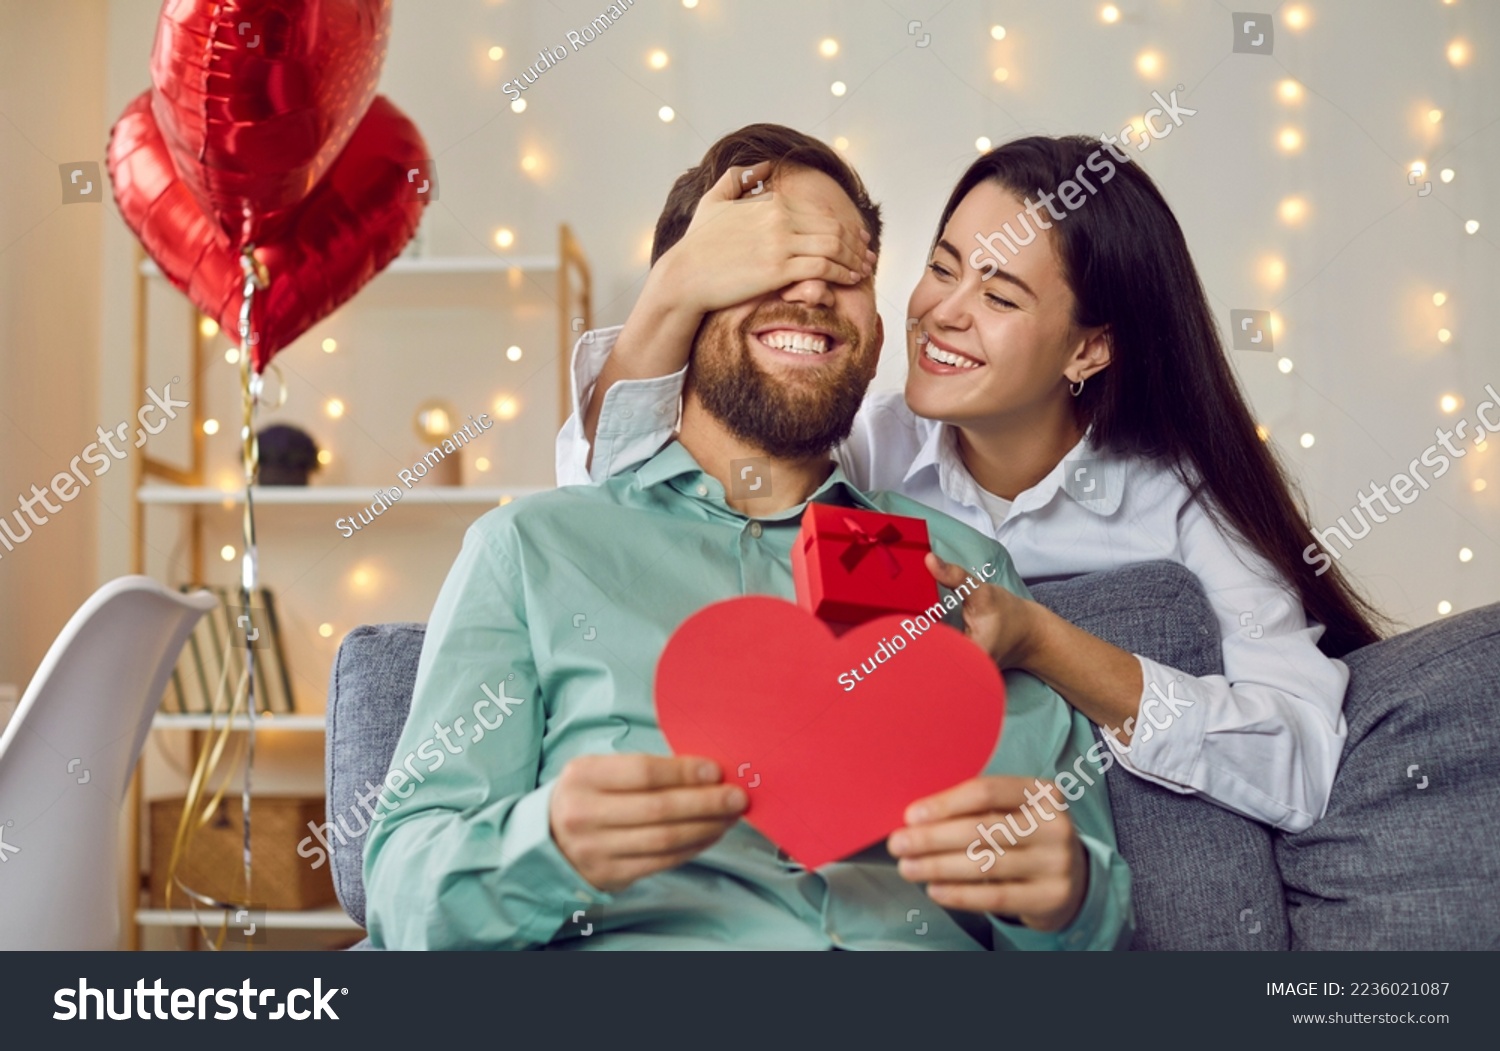 Joyful young couple celebrating St Valentine's Day. Loving woman makes surprise for her boyfriend on Saint Valentine's Day. Happy girlfriend covers man's eyes and gives him greeting card and gift box #2236021087